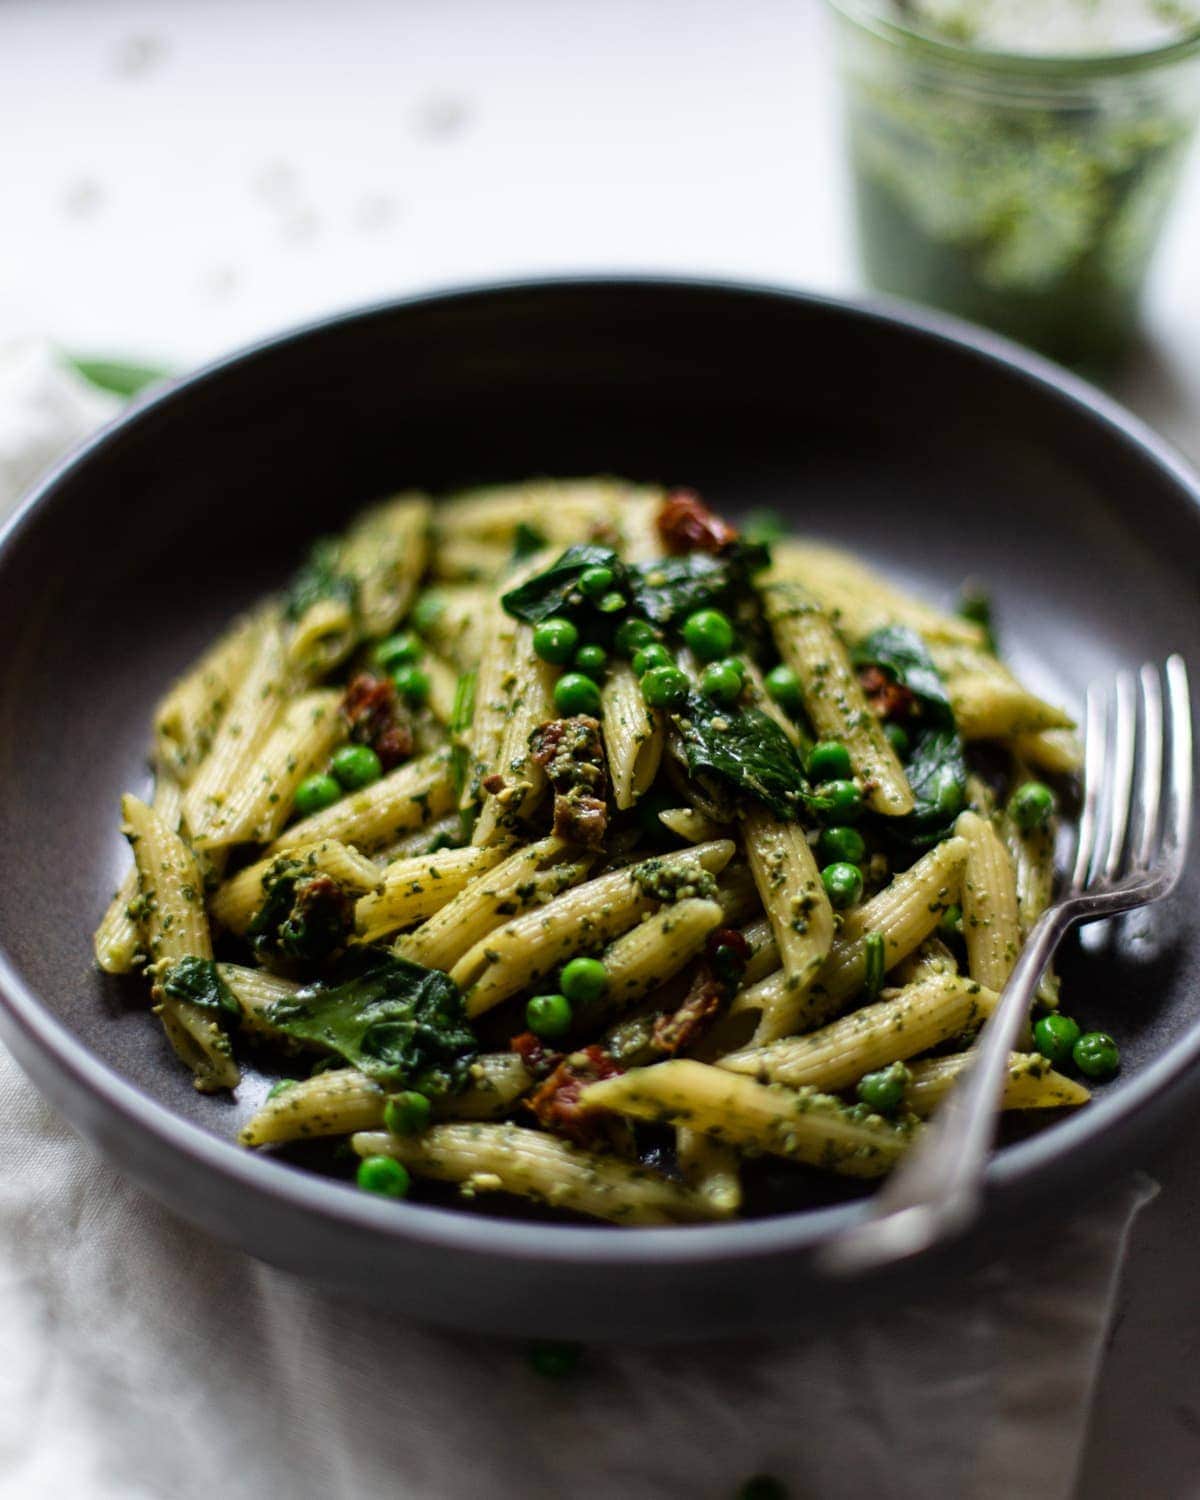 A side-on photo of pesto Penne pasta in a dark grey bowl, with a silver fork in the bowl on the right hand side, and the jar of fresh pesto in the background.